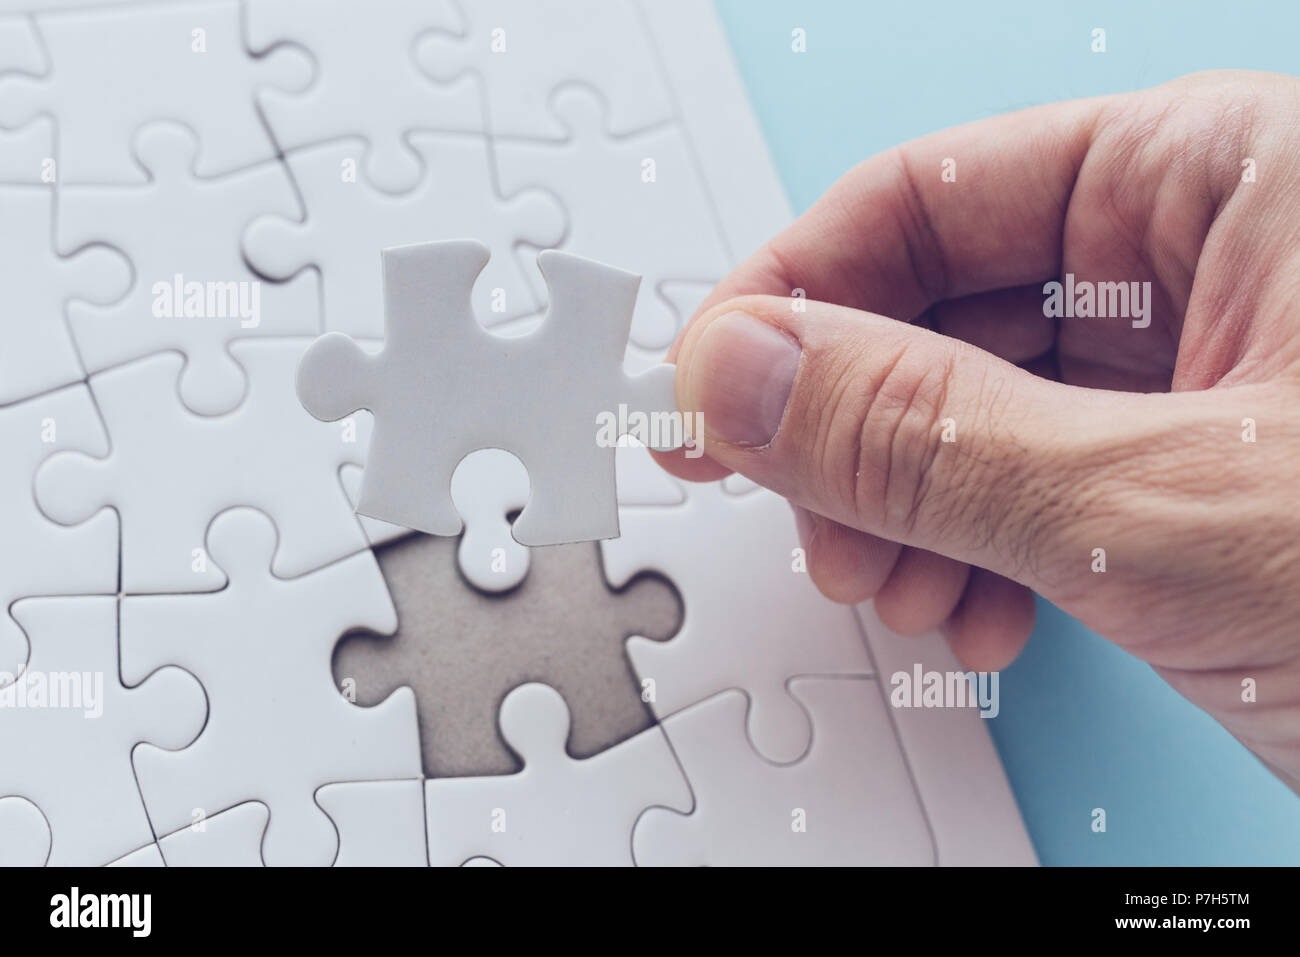 Man successfully solving jigsaw puzzle, hand putting a missing piece to complete the solution Stock Photo